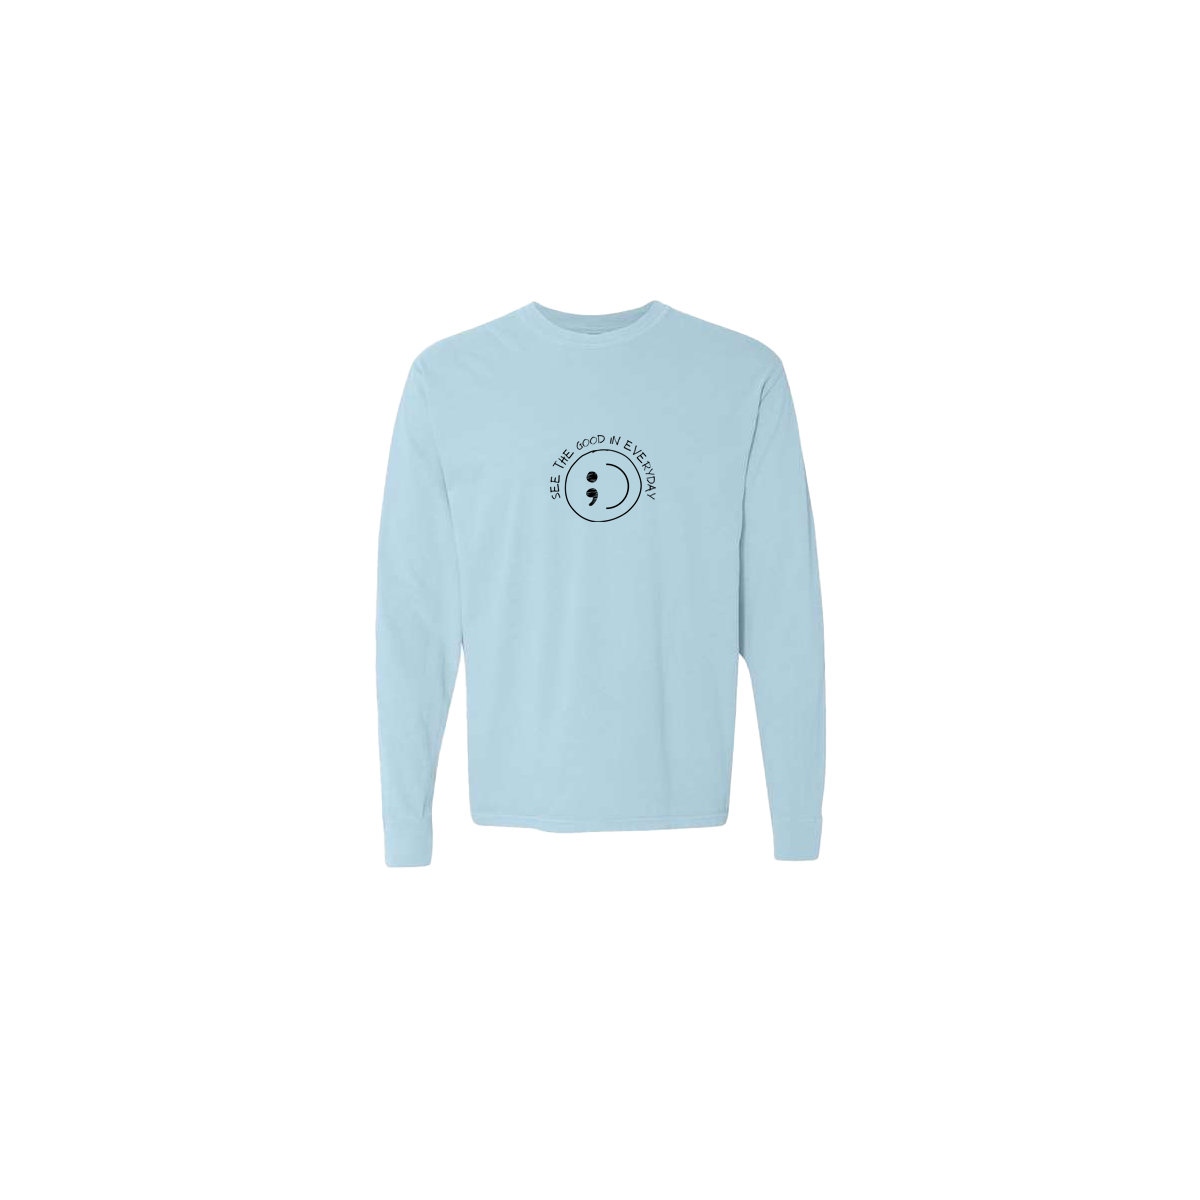 See the Good in Everyday Smiley Embroidered Light Blue Long Sleeve Tshirt - Mental Health Awareness Clothing